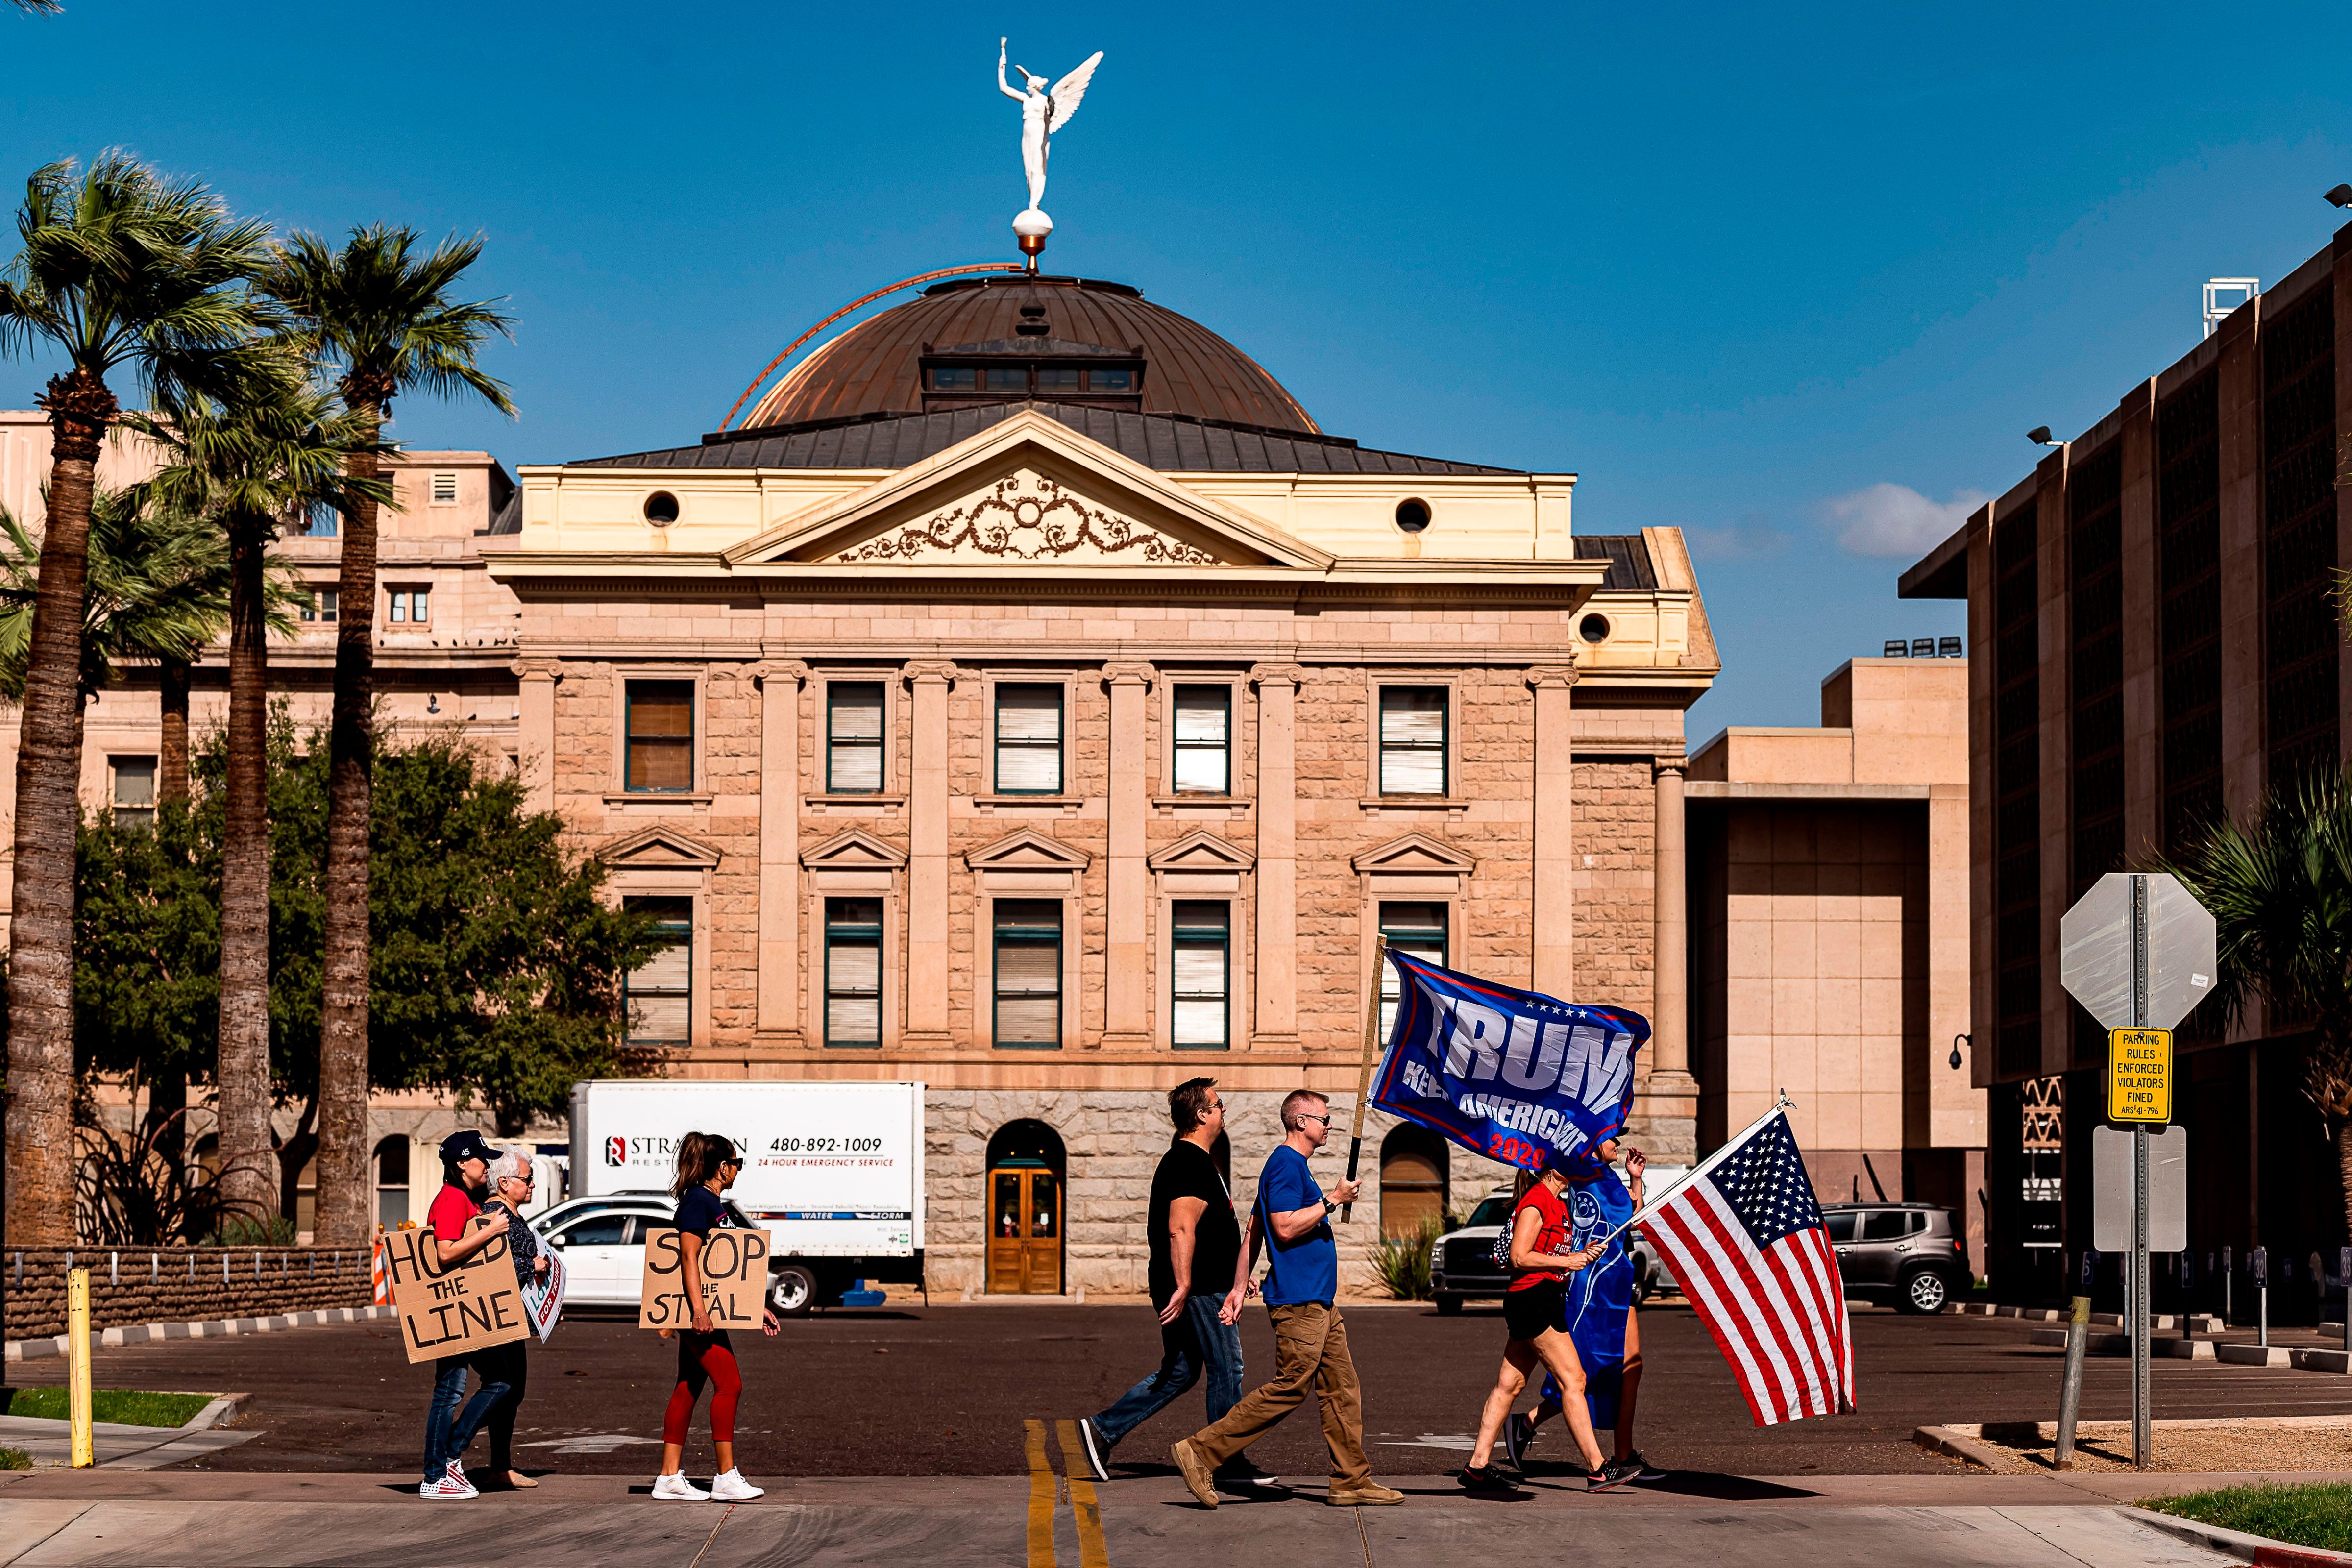 Supporters of former President Donald Trump protest in front of the Arizona State Capitol in Phoenix, Arizona, on November 7, 2020. (Olivier Touron/AFP—Getty Images)